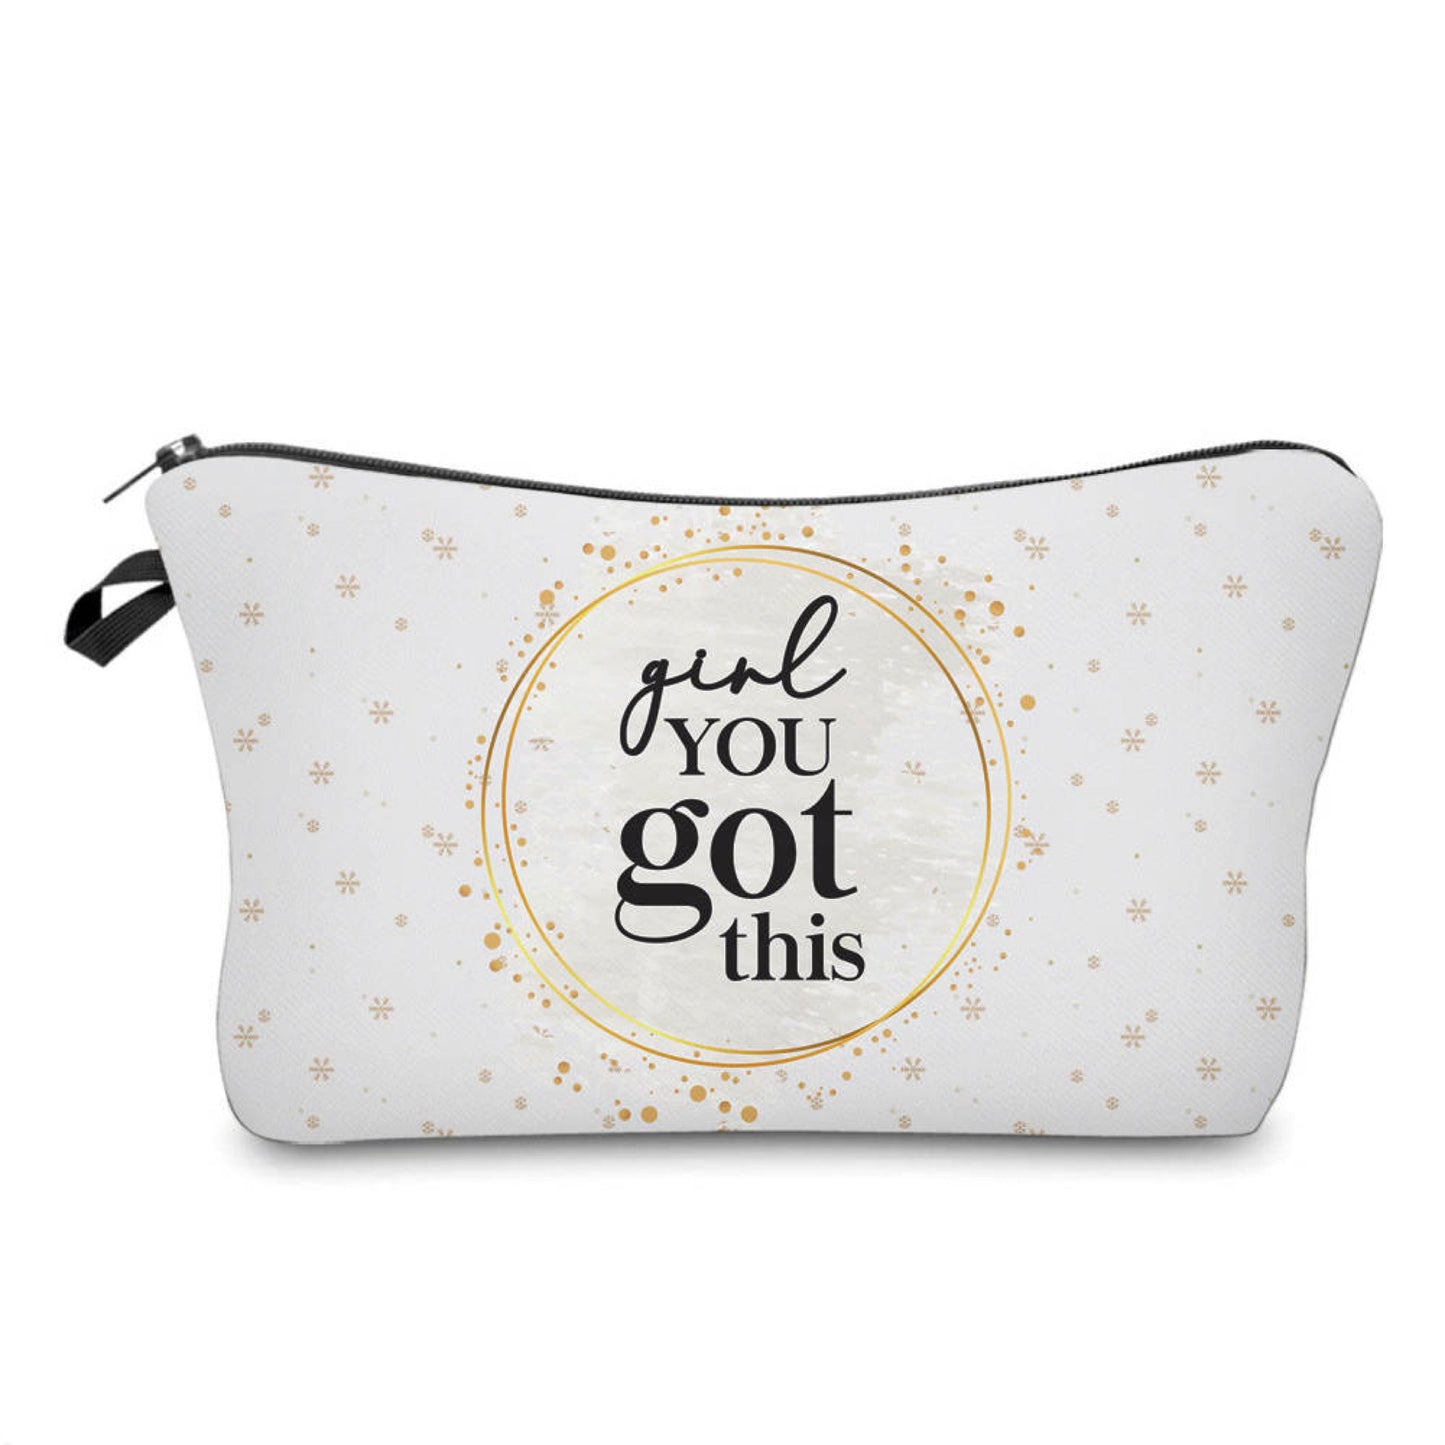 Girl You Got This - Water-Resistant Multi-Use Pouch